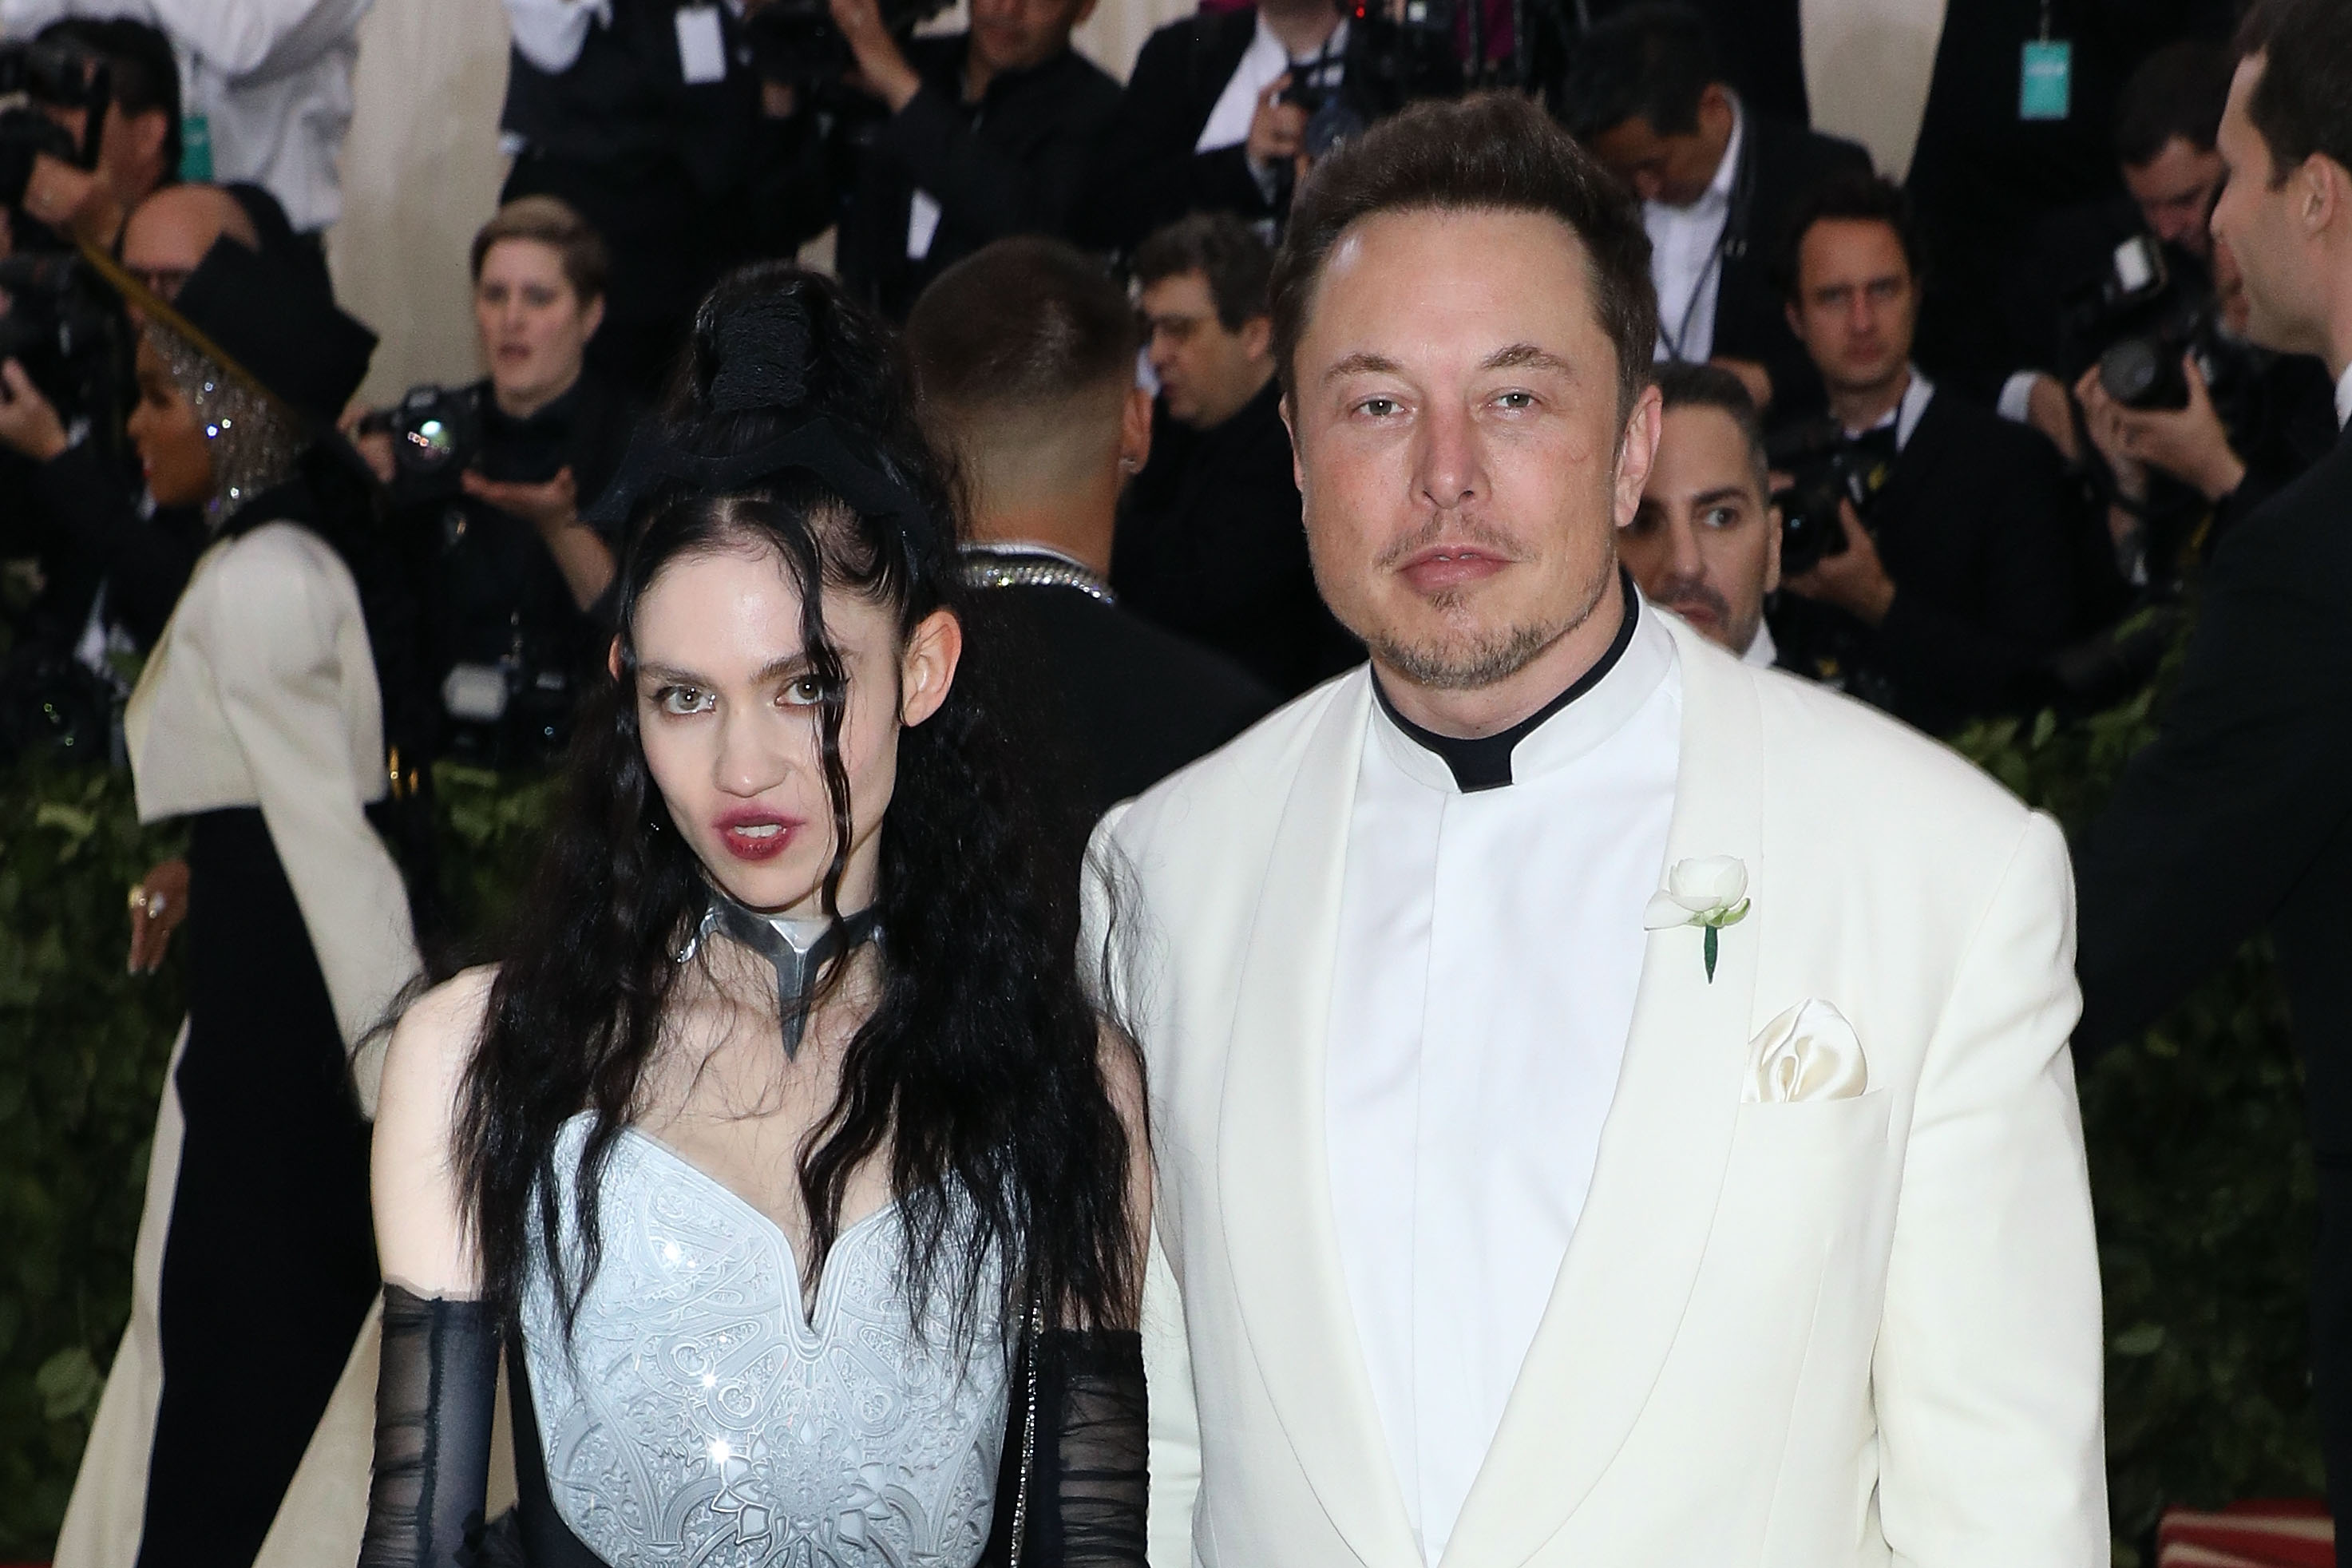 Grimes and Elon Musk, who recently broke up, pose together on the Met Gala red carpet in black and white outfits.